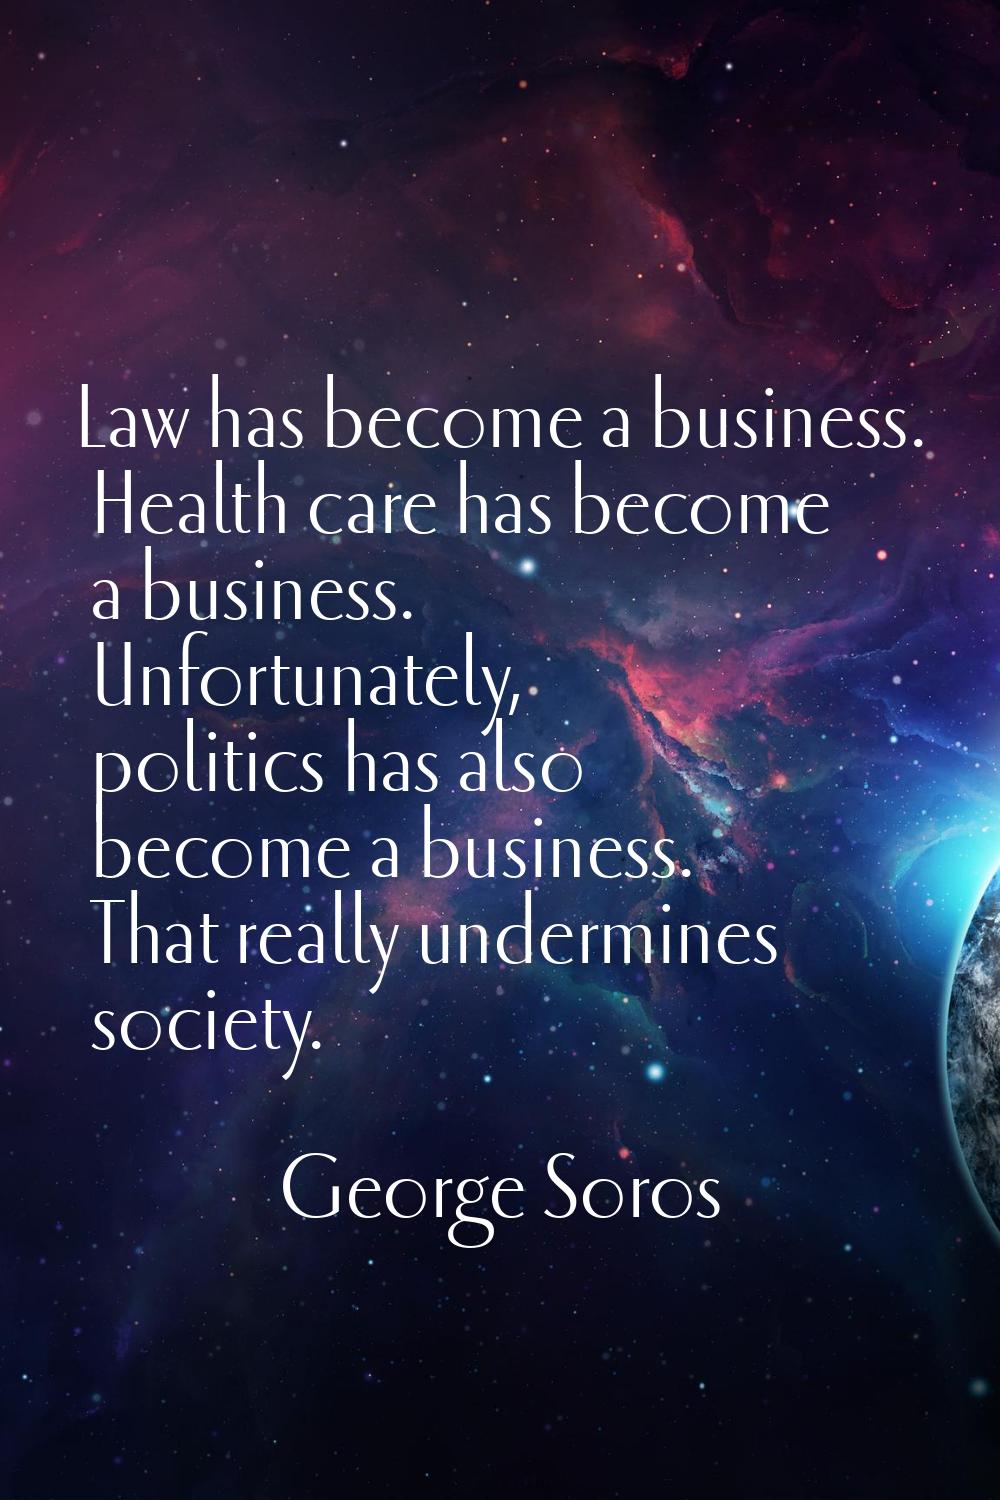 Law has become a business. Health care has become a business. Unfortunately, politics has also beco